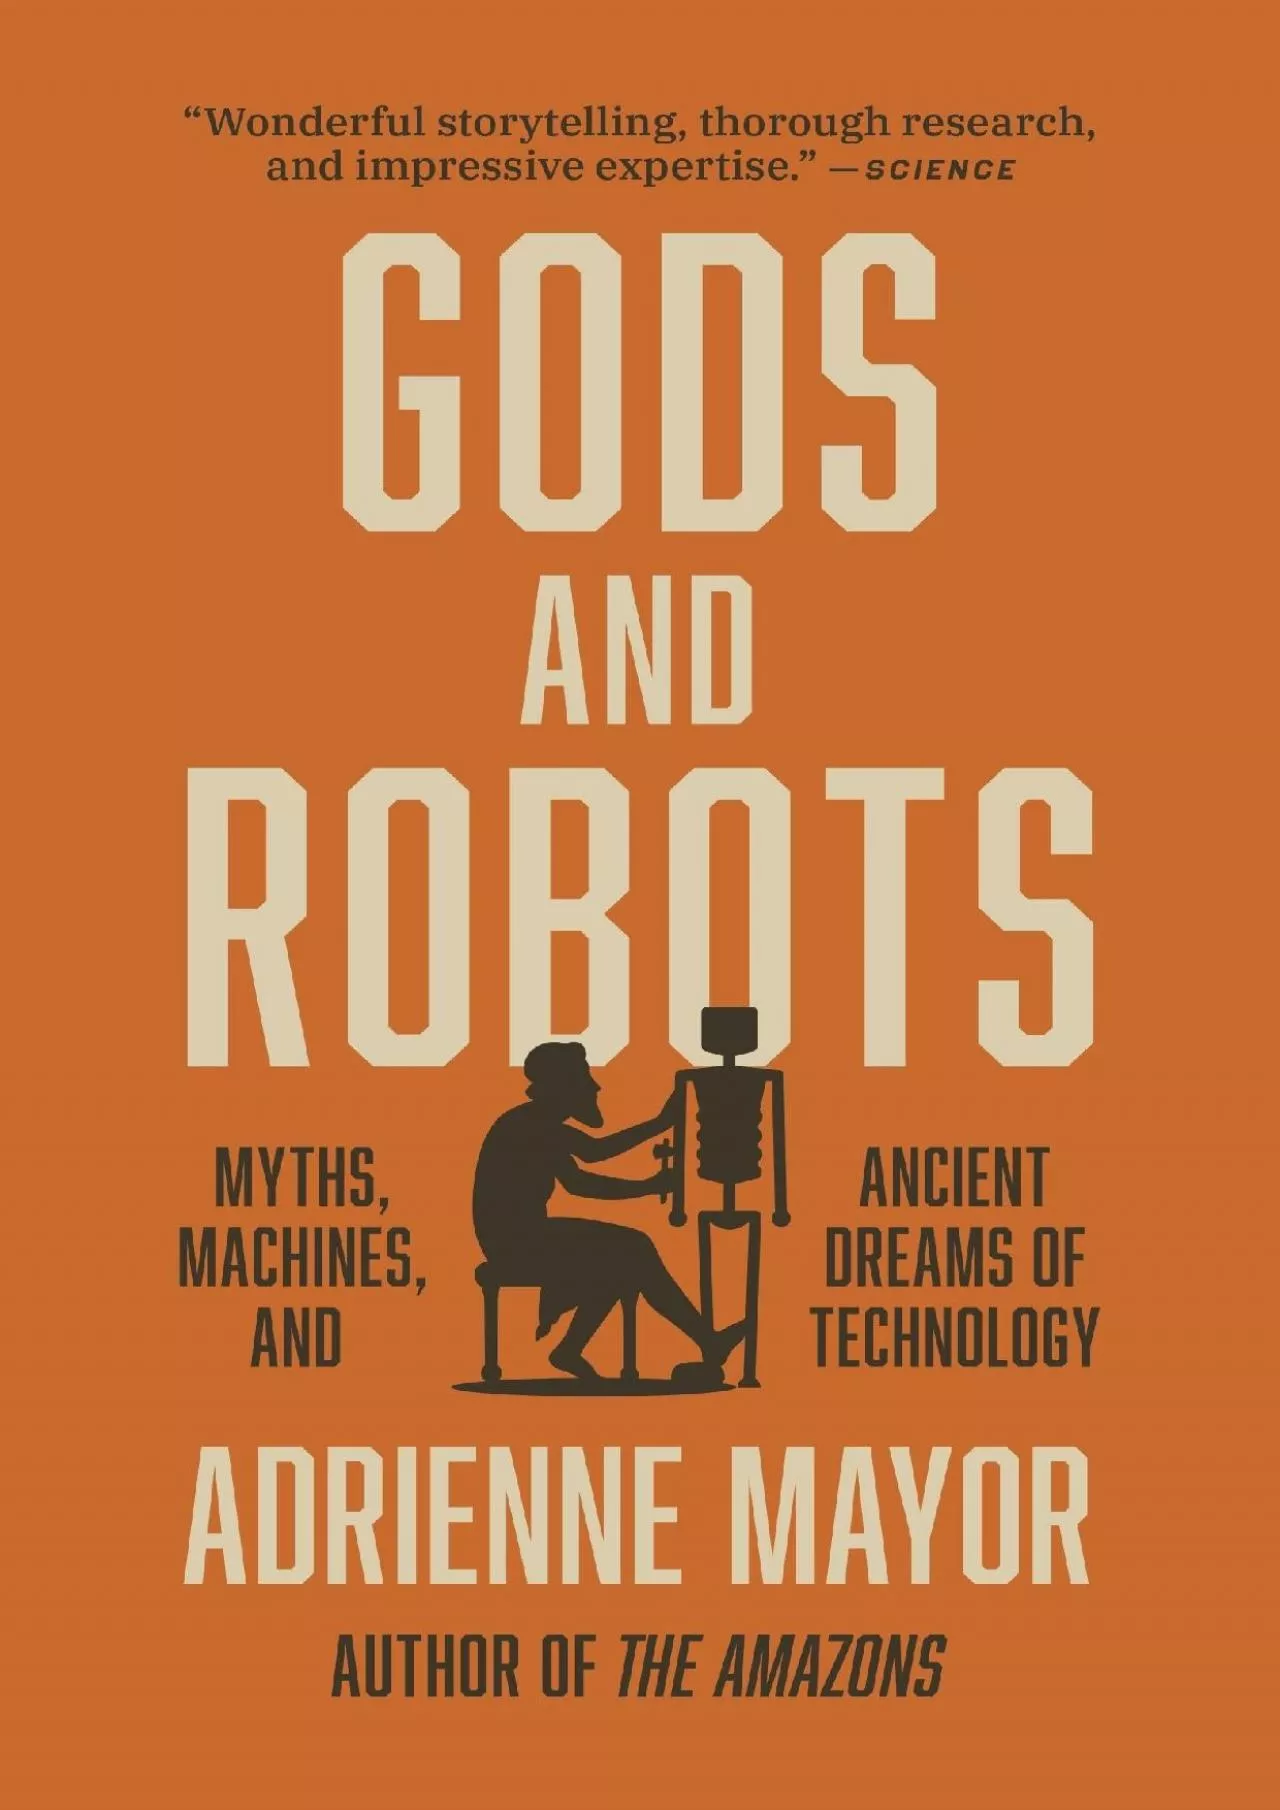 [EBOOK]-Gods and Robots: Myths, Machines, and Ancient Dreams of Technology